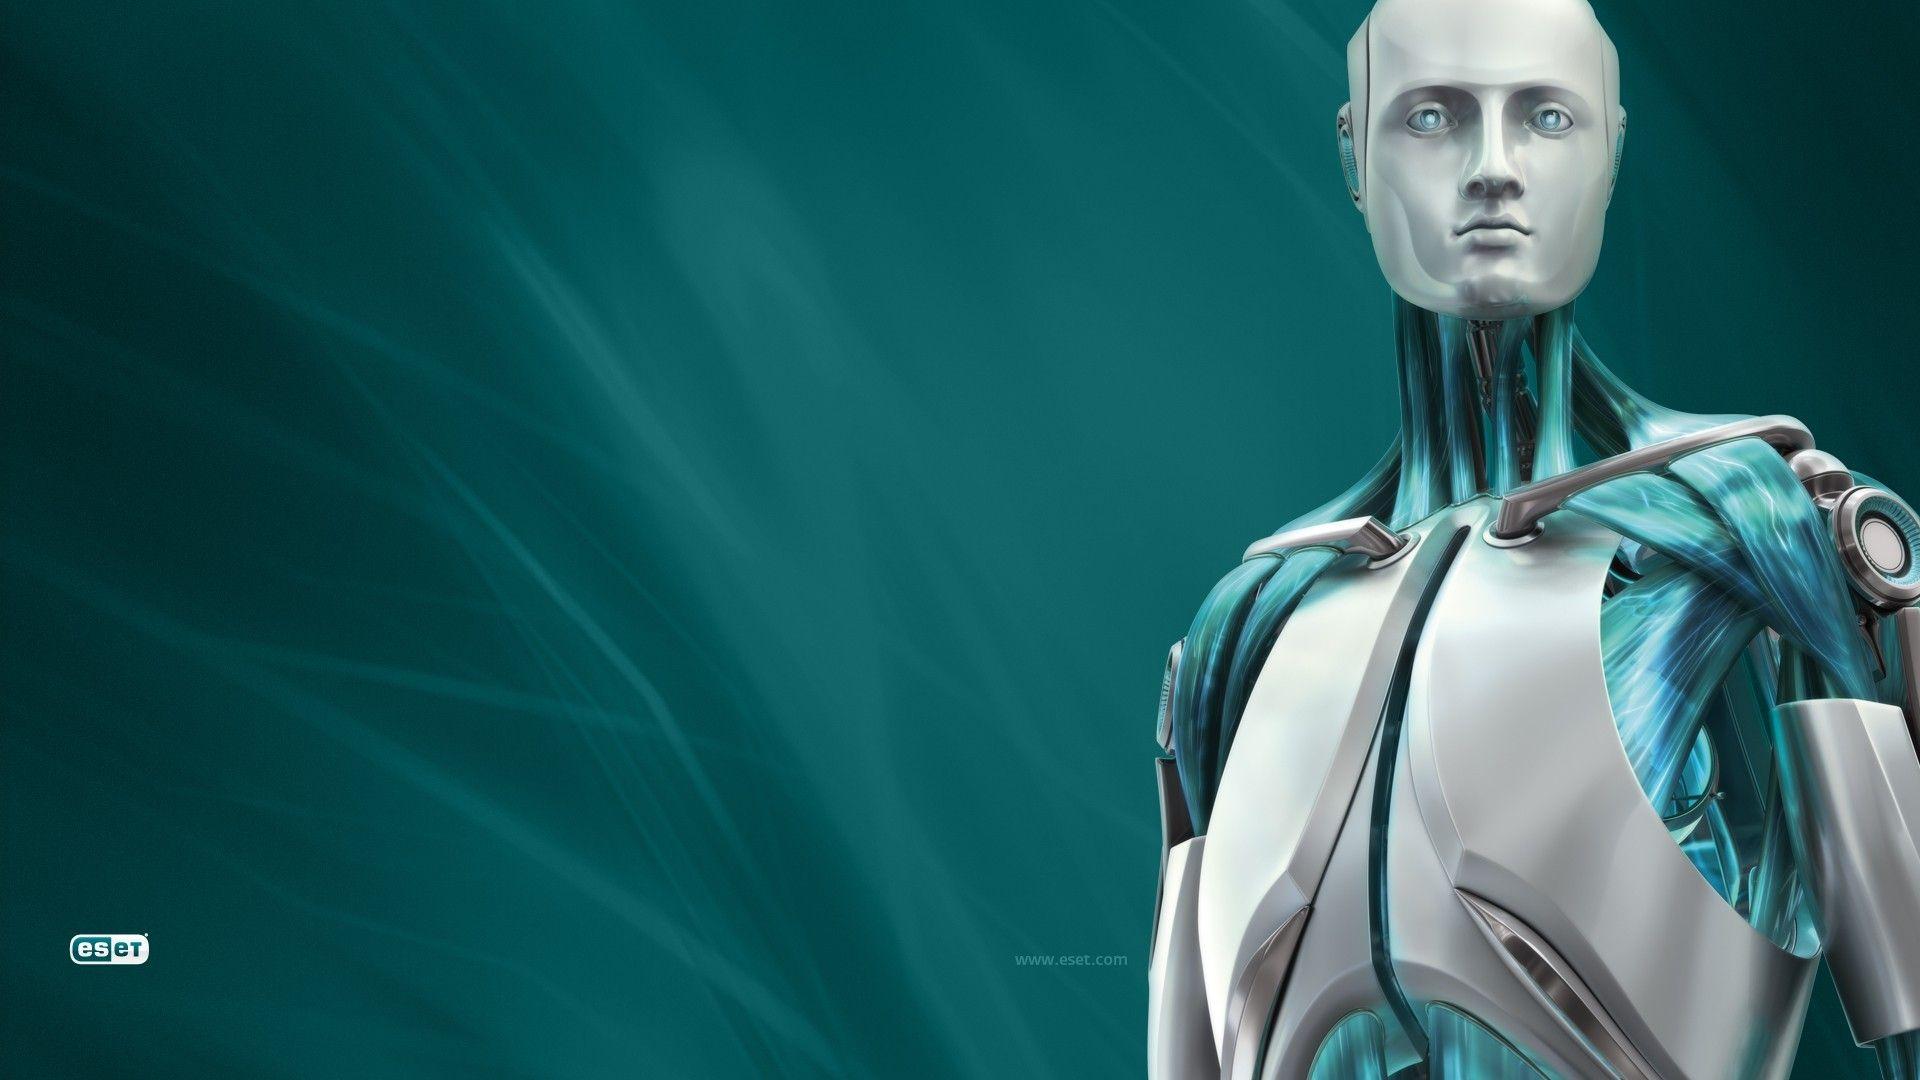 Android, security, virus, Artificial intelligence, eset :: Wallpapers